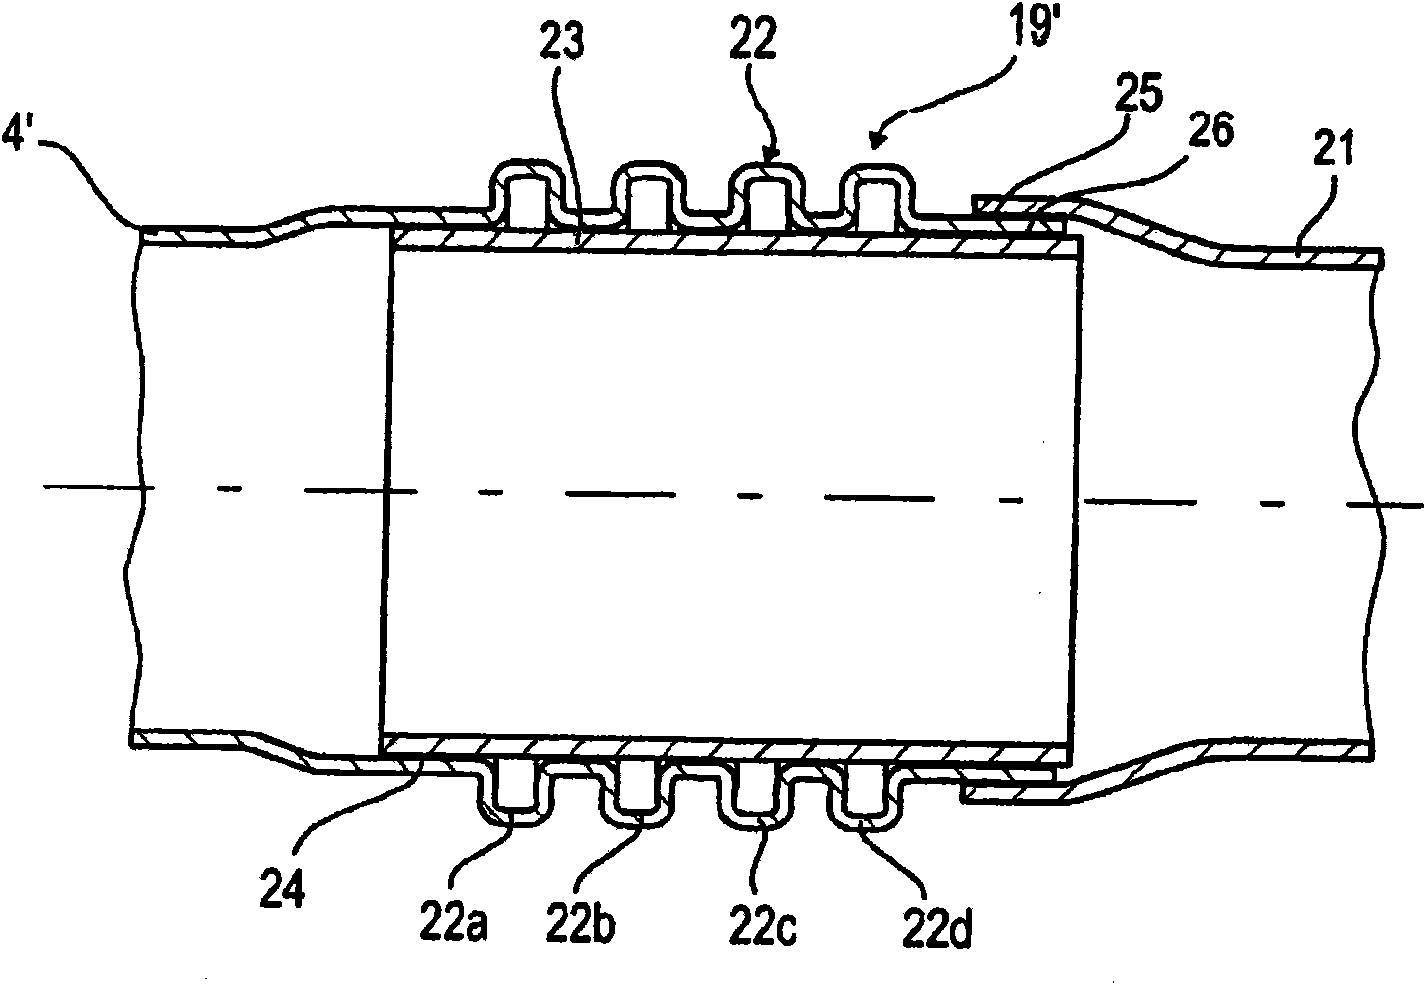 Exhaust manifold of an internal combustion engine